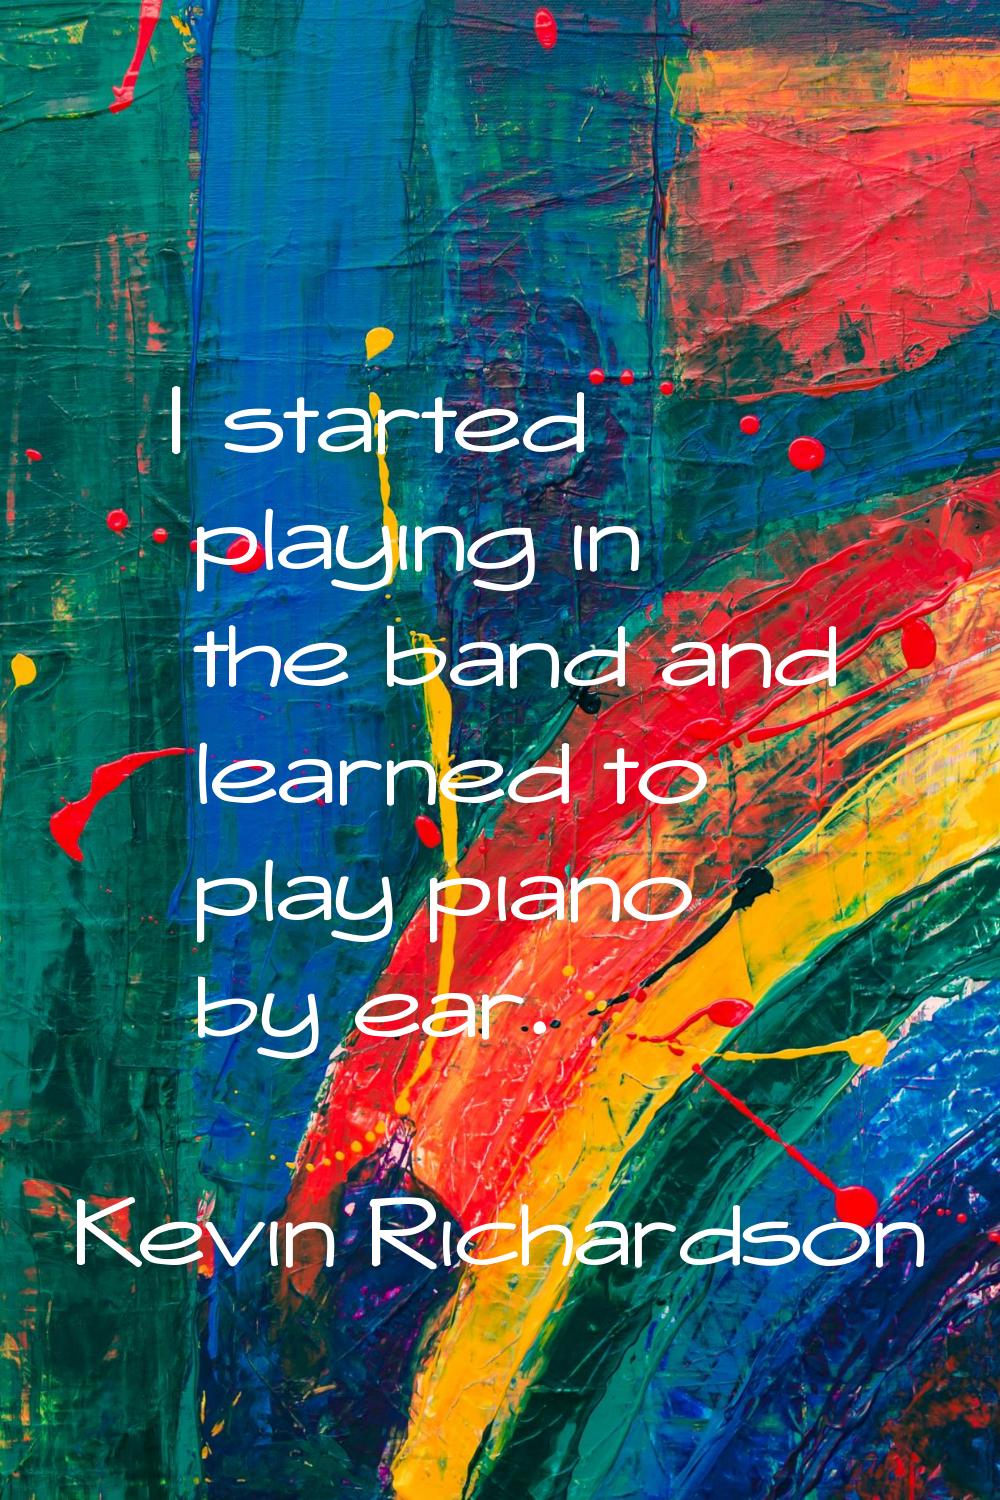 I started playing in the band and learned to play piano by ear.